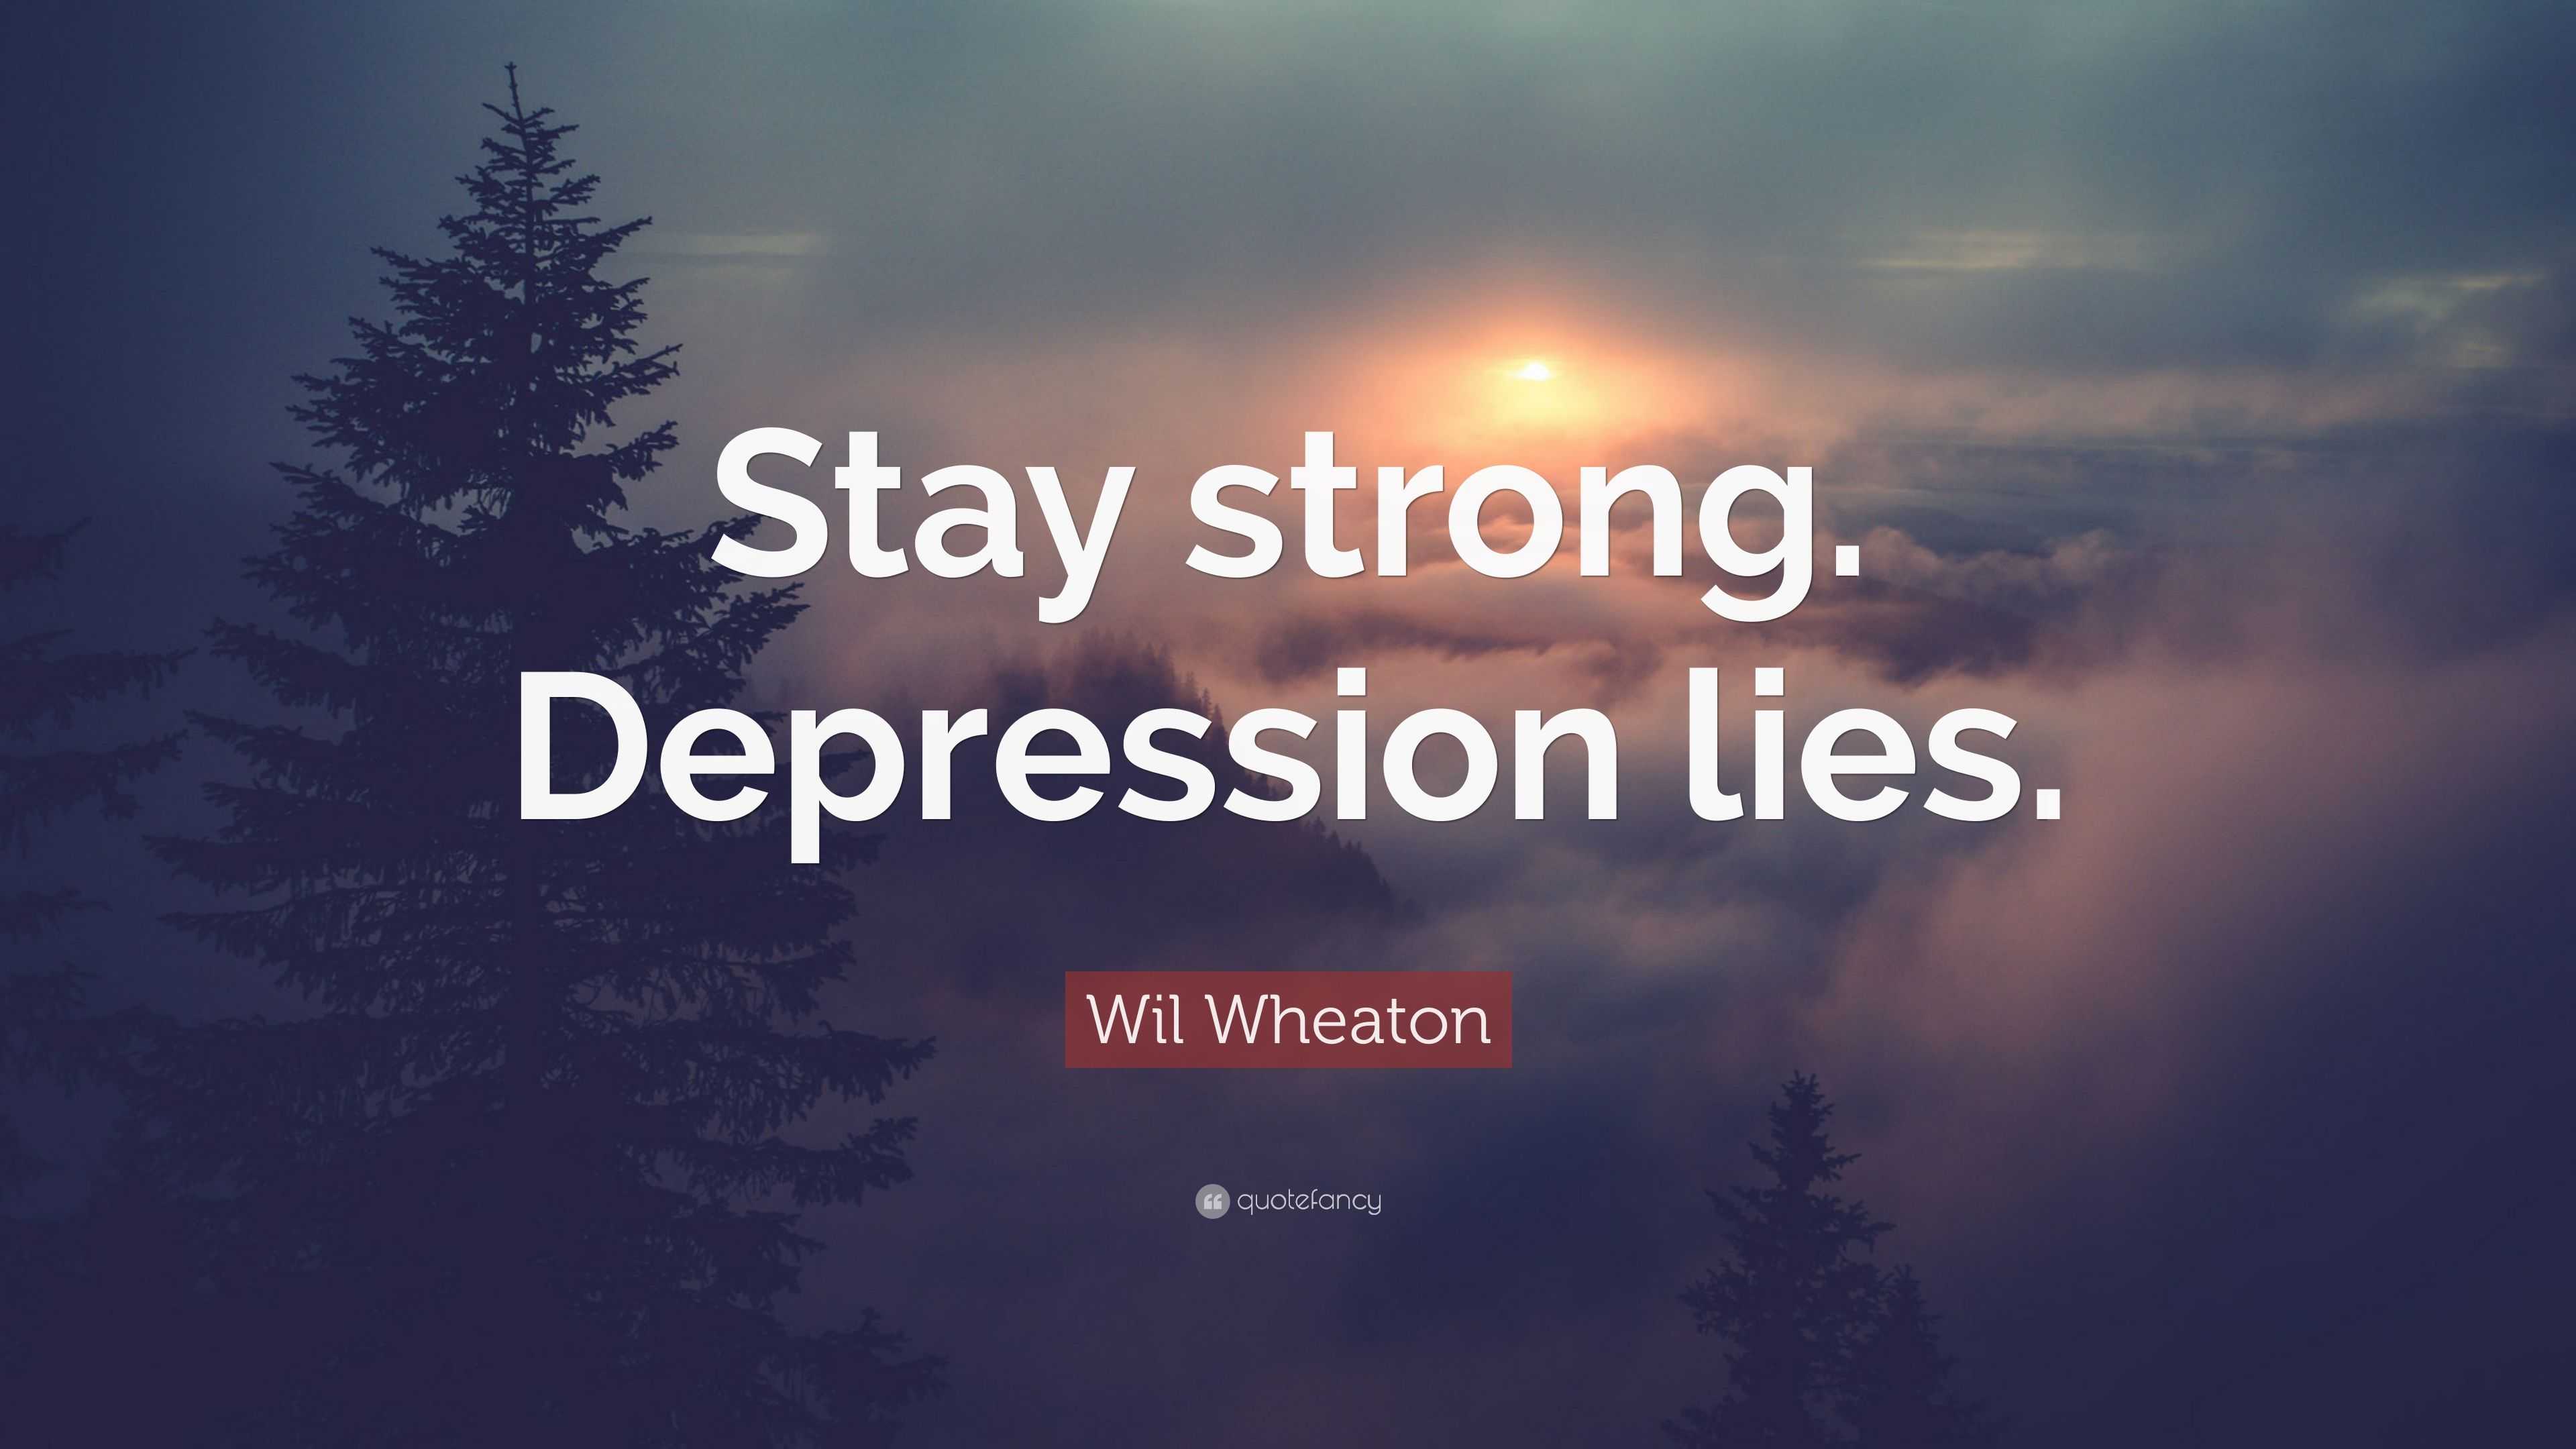 Wil Wheaton Quote: “Stay strong. Depression lies.”